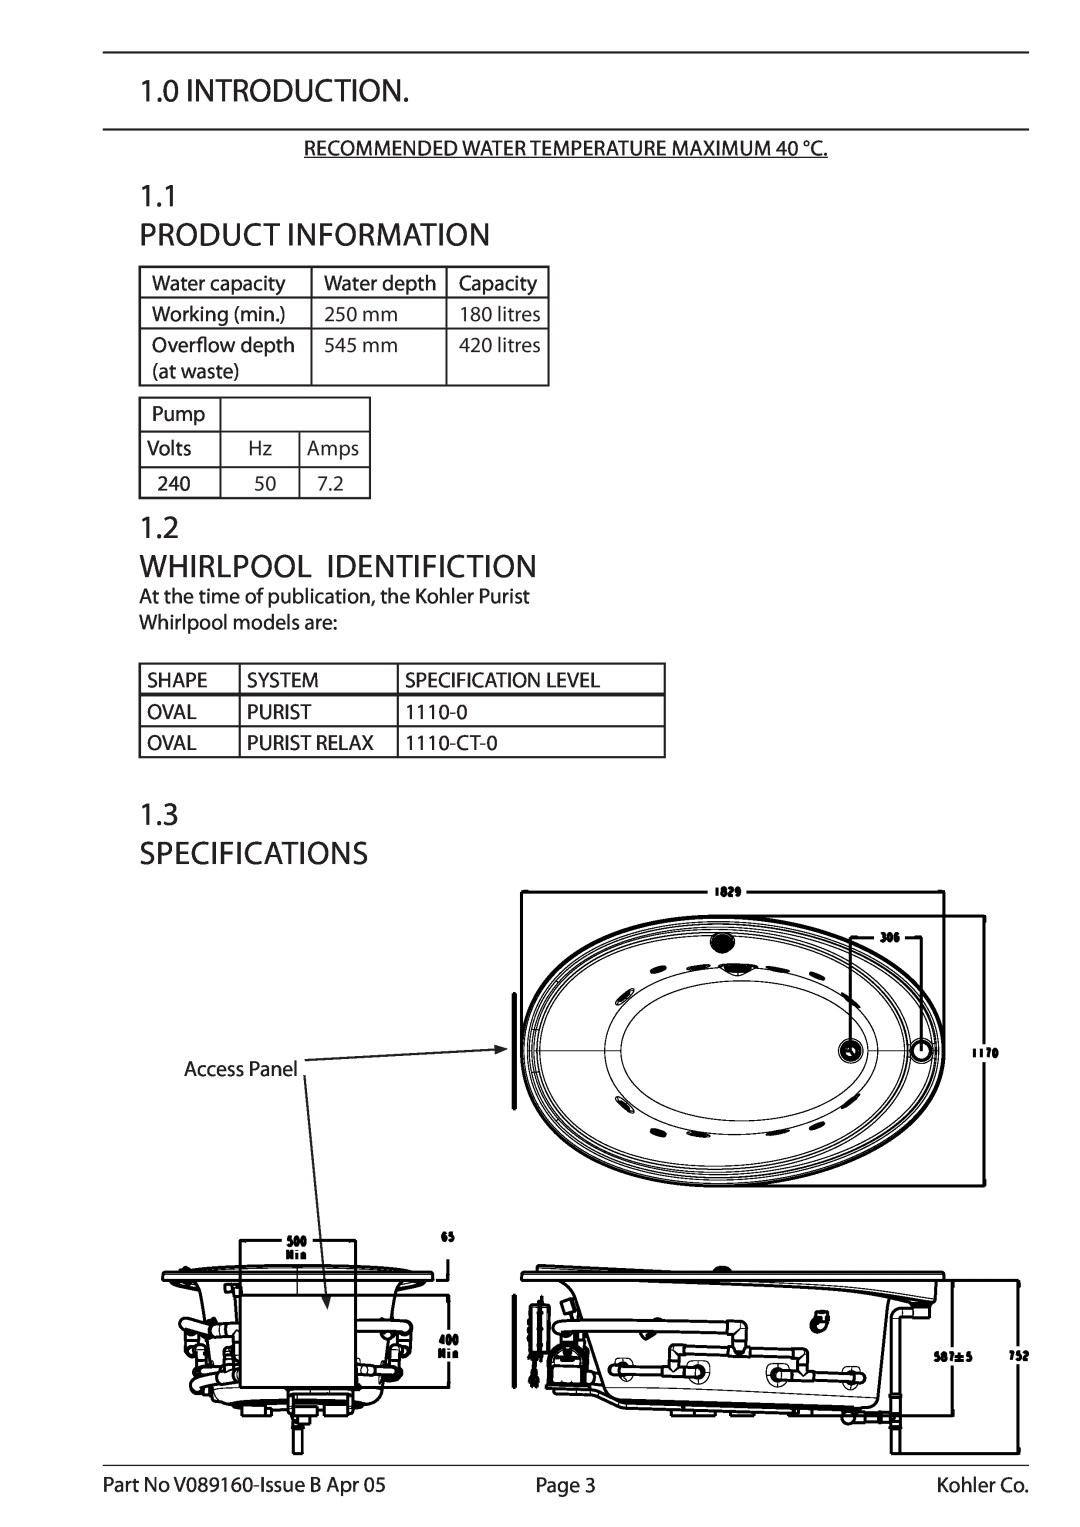 Kohler K-1110-CT-0, V089160 Introduction, Product Information, Whirlpool Identifiction, Specifications 